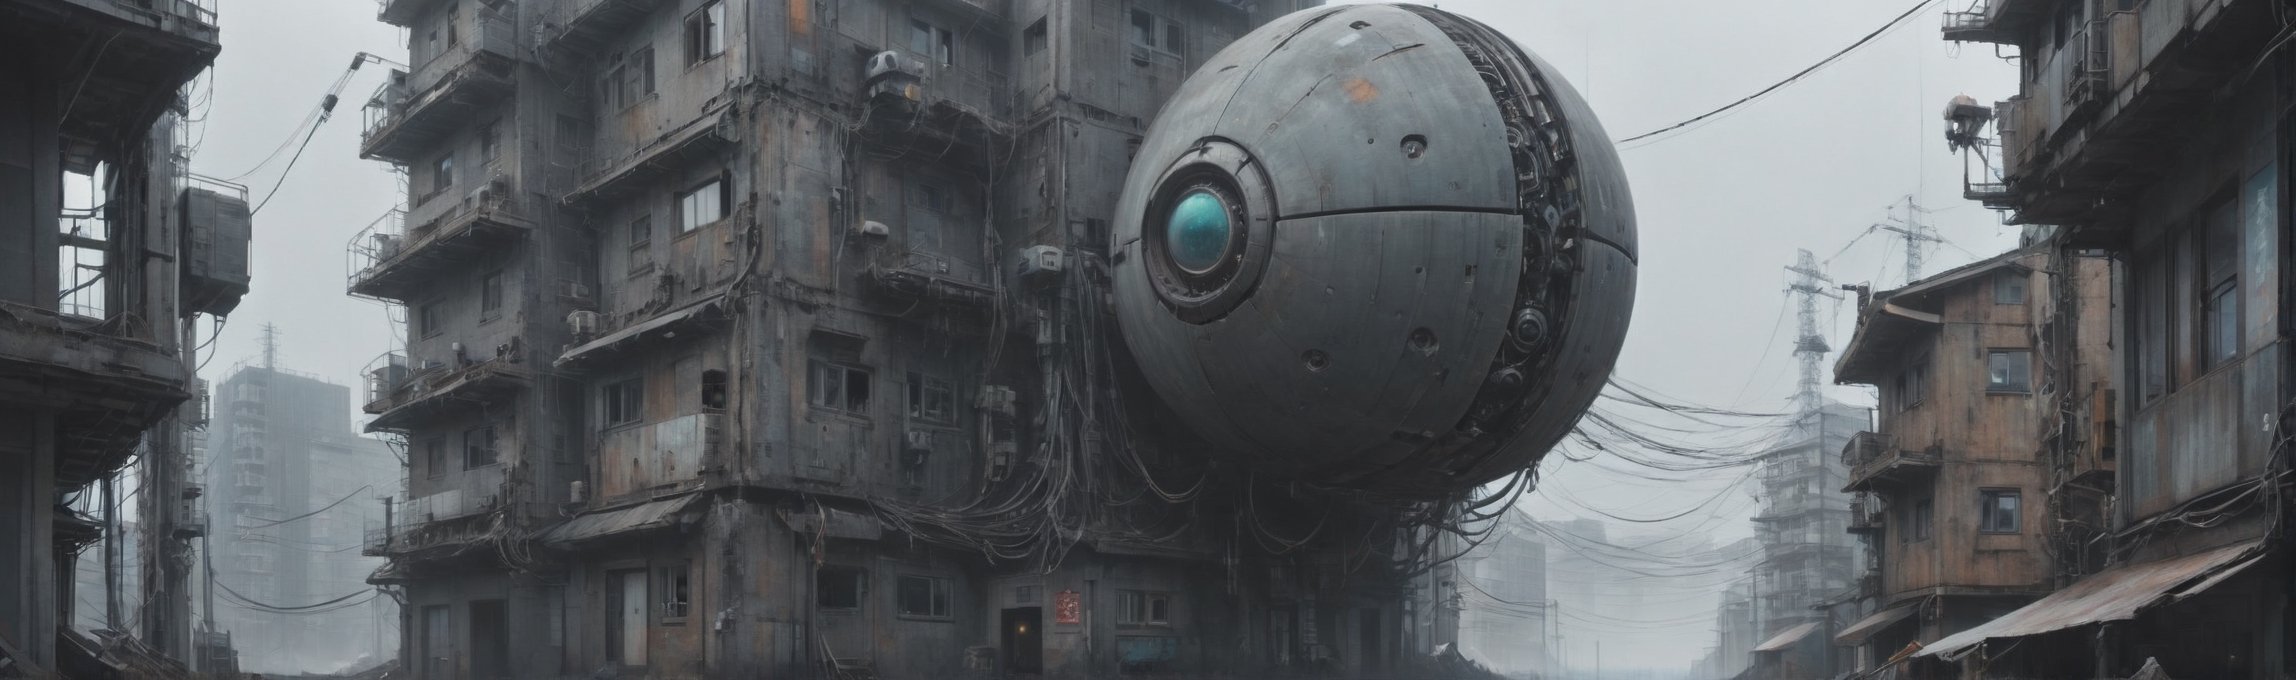 It generates a high-quality cinematic image by Simon Stålenhag, (panoramic view), sci-fi landscape, extreme details, ultra definition, extreme realism, high-quality lighting.

The viewer finds a small strange spherical high-tech artifact that crashed in a distopic cyberpunk downtown neighborhood, the doomsday has started, some intrincate detailed sci-fi futuristic buildings was built over the old buildings of a Japanese downtown neighborhood, from below.

(great composition), (aureal composition), (great art).
(scifi high tech), (mechanical aesthetic), (circuits in the walls), (High Tension Power Lines), (distopic future), (rust and decay), (mysterious alien's spaceships appear in the distance), (heavy machinery), (cyberpunk adjuncts), (wires and cables), (wind), (fog), (rich of depth).

(cinematic), (monochrome), (masterpiece), (8k), (best quality), (great artist), (realistic), (photo realistic), (fine details), (intrincate detailed), (muted colors)